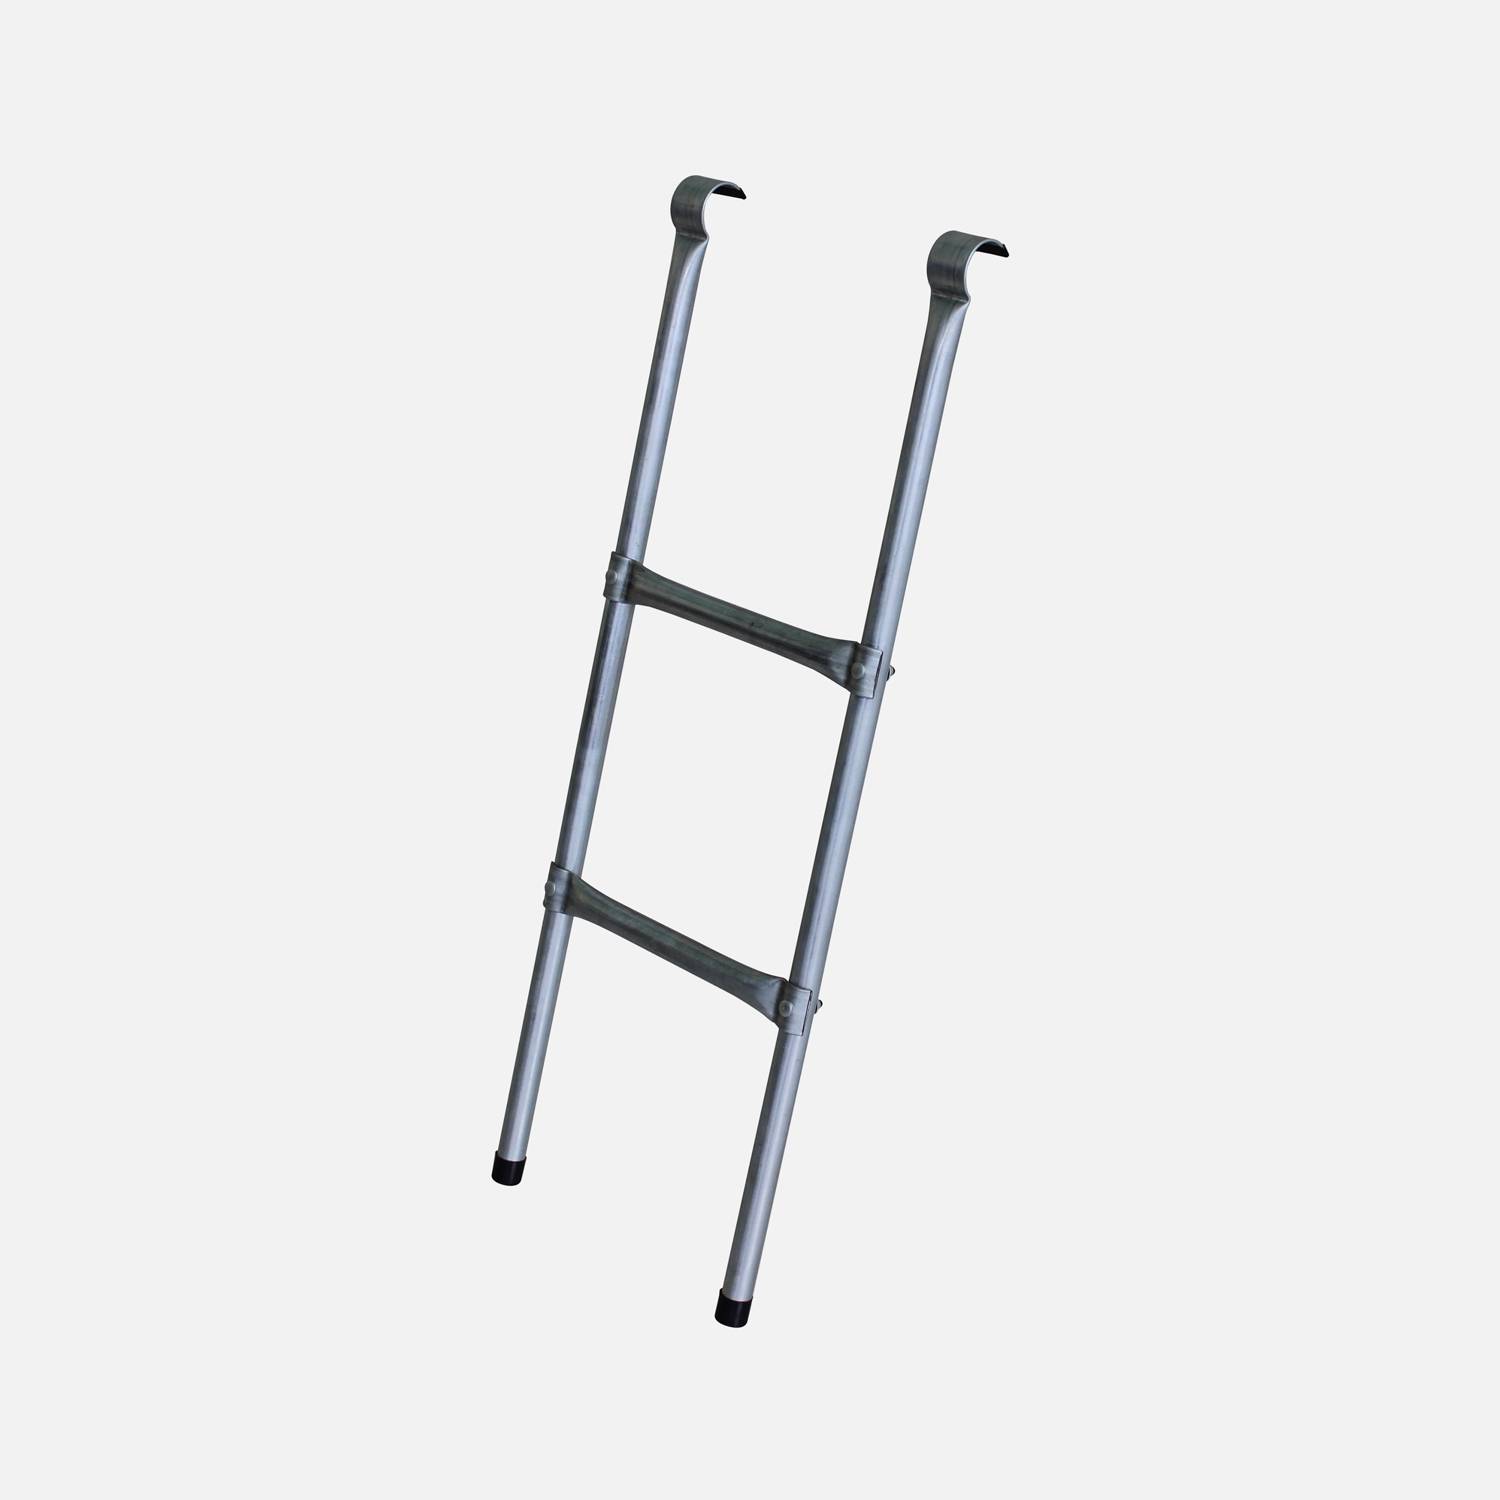 Ladder for trampoline from 305 to 430 cm diameter - Steel - PRO quality - EU standards. Photo1